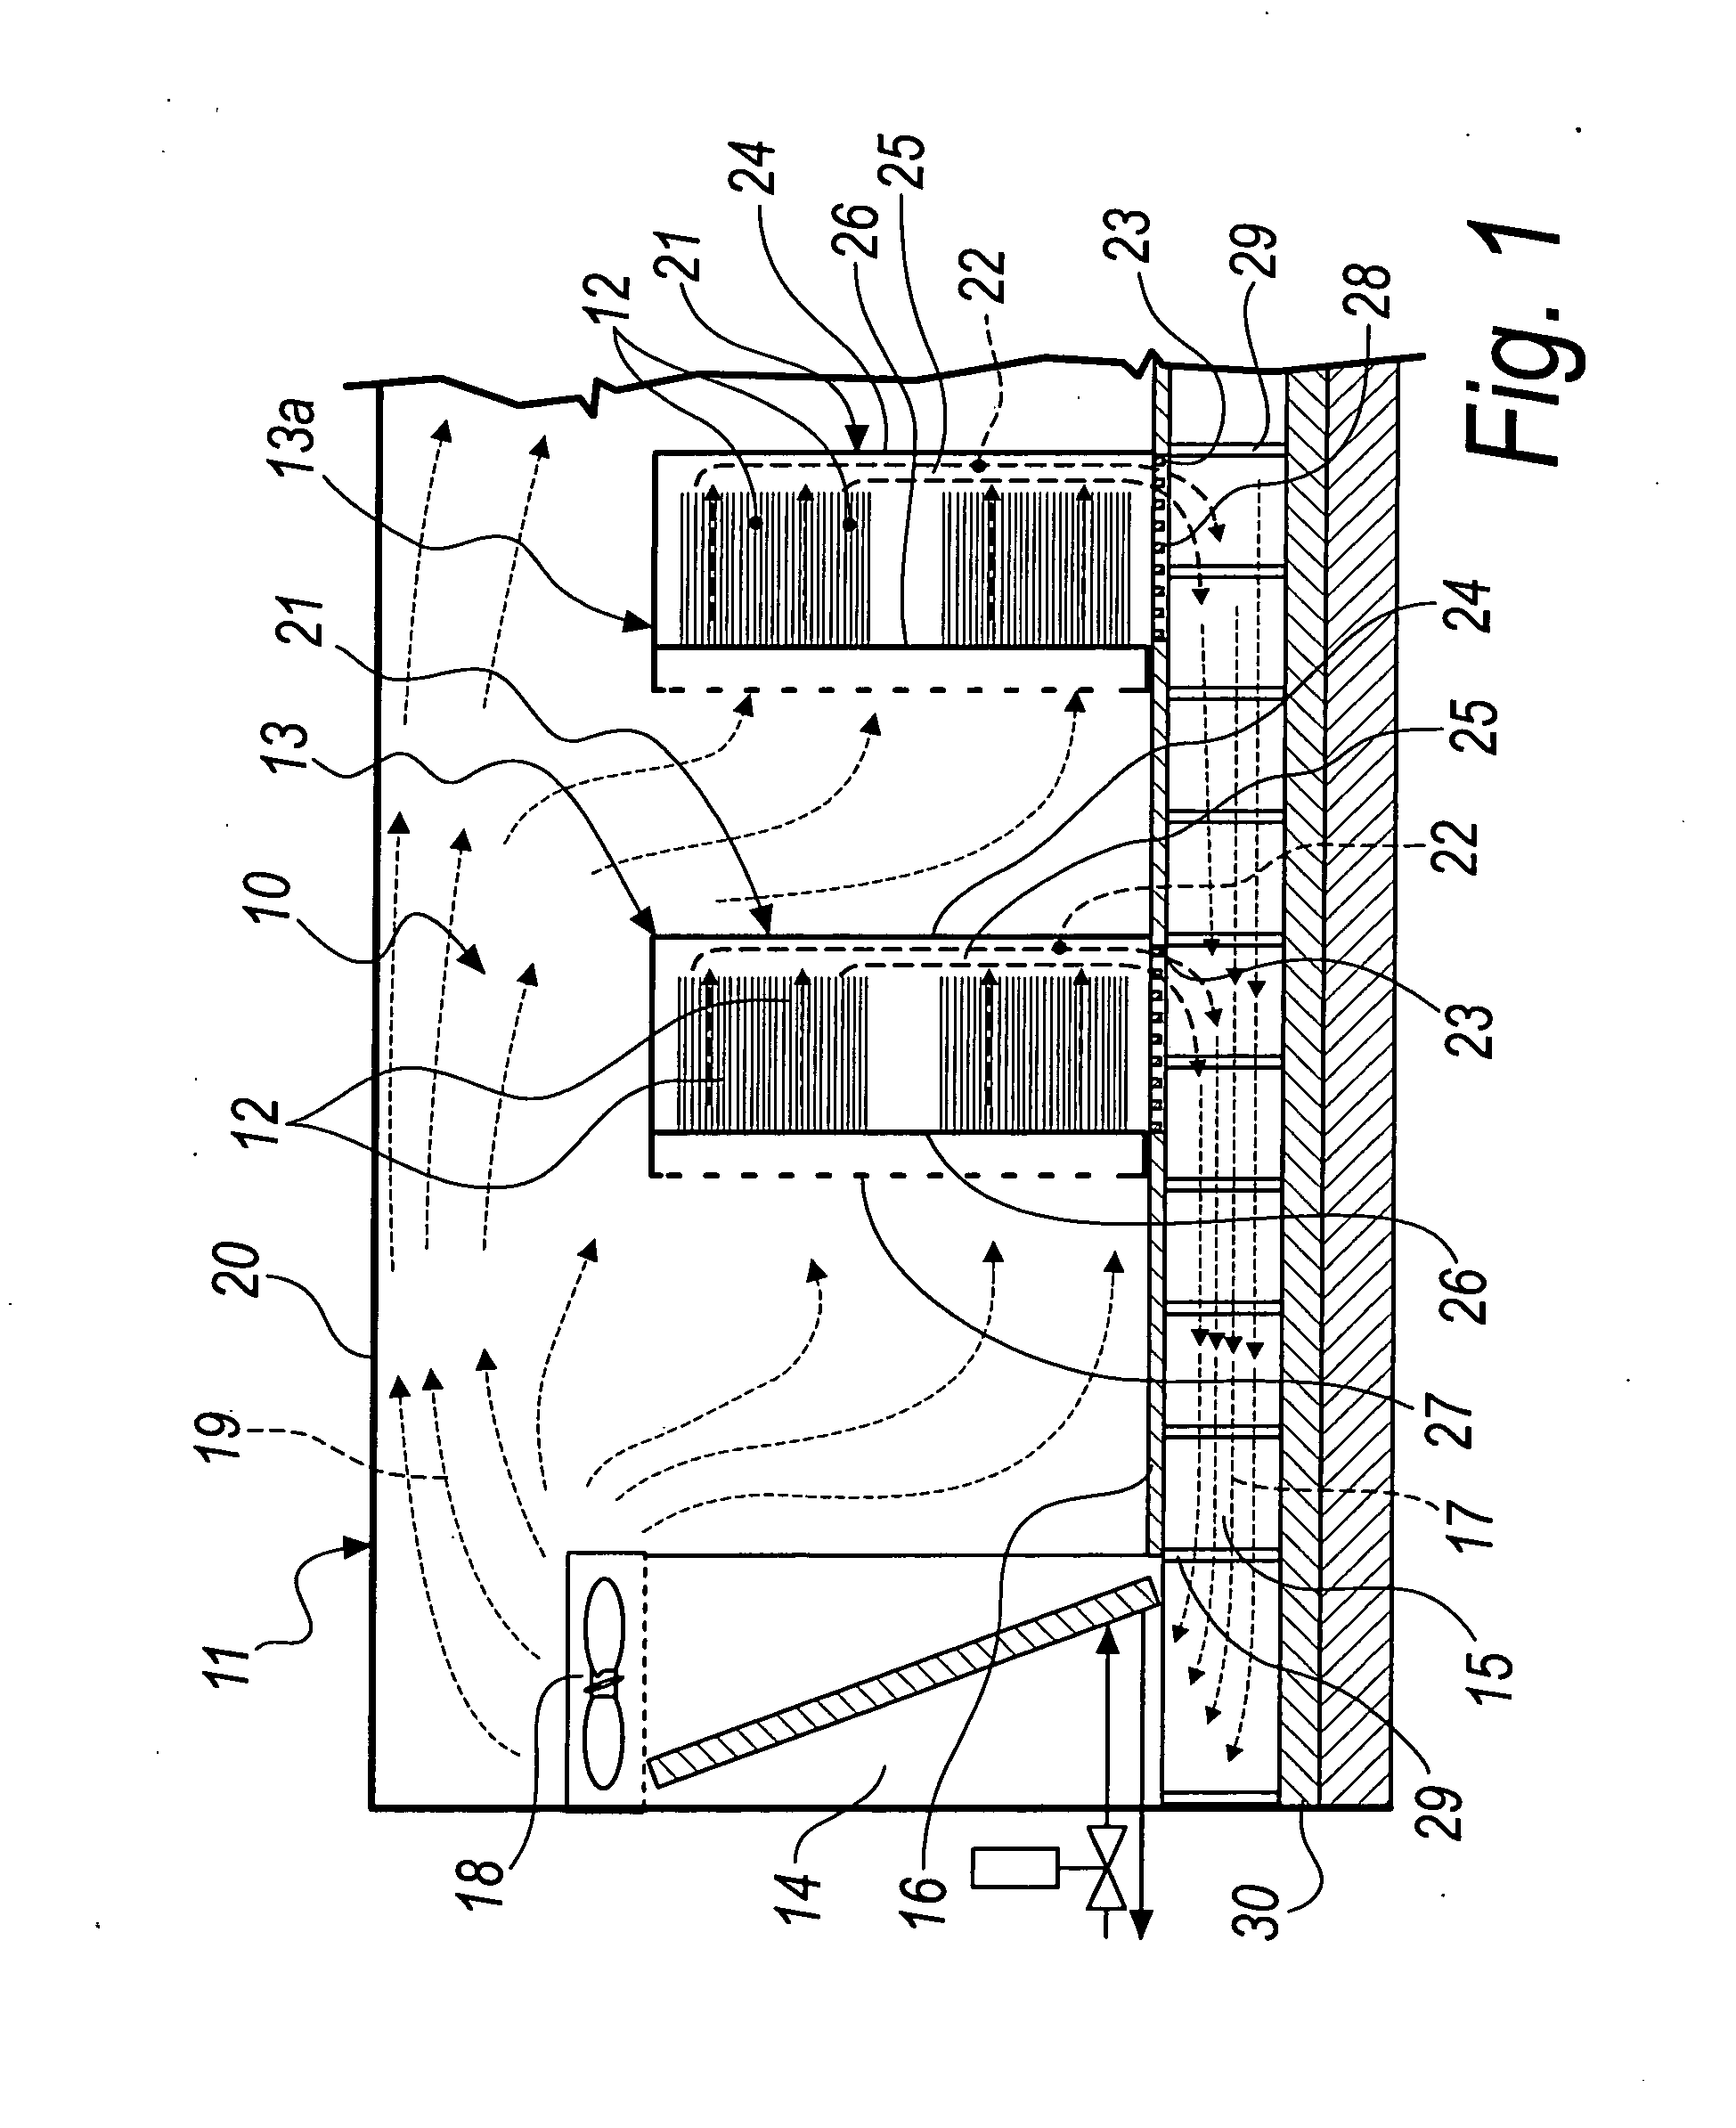 Device for cooling and conditioning an environment containing a plurality of heat emitting bodies, particularly for server rooms and the like